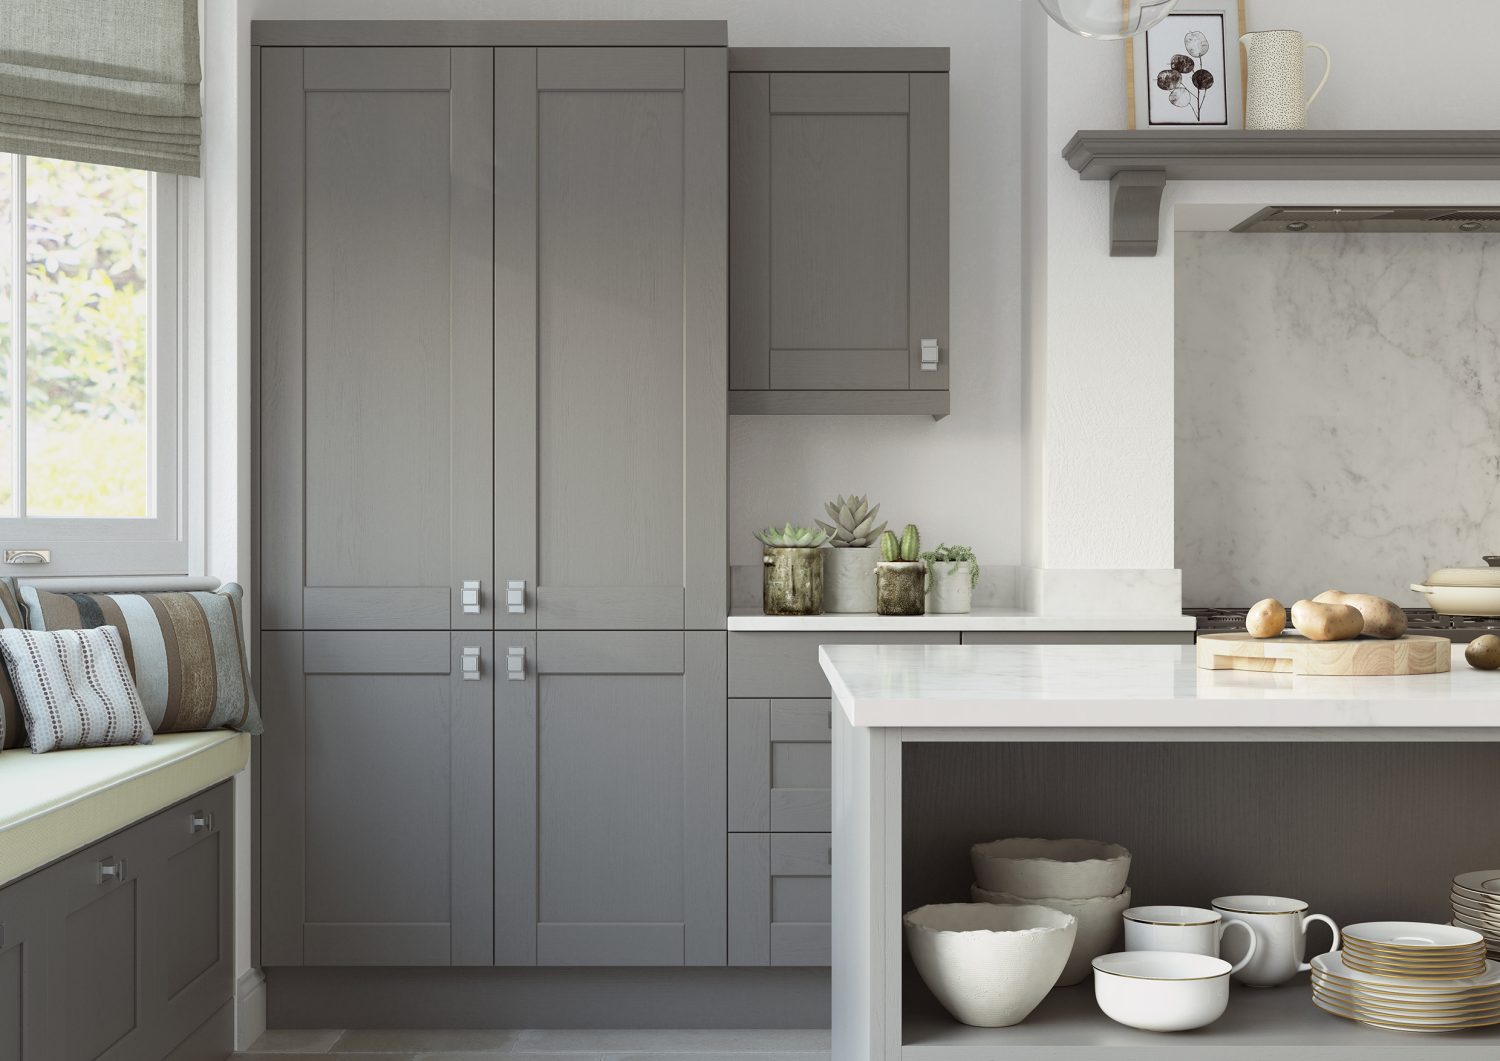 Kendal tall shaker kitchen cabinet door in Dust Grey, made by The Kitchen Depot